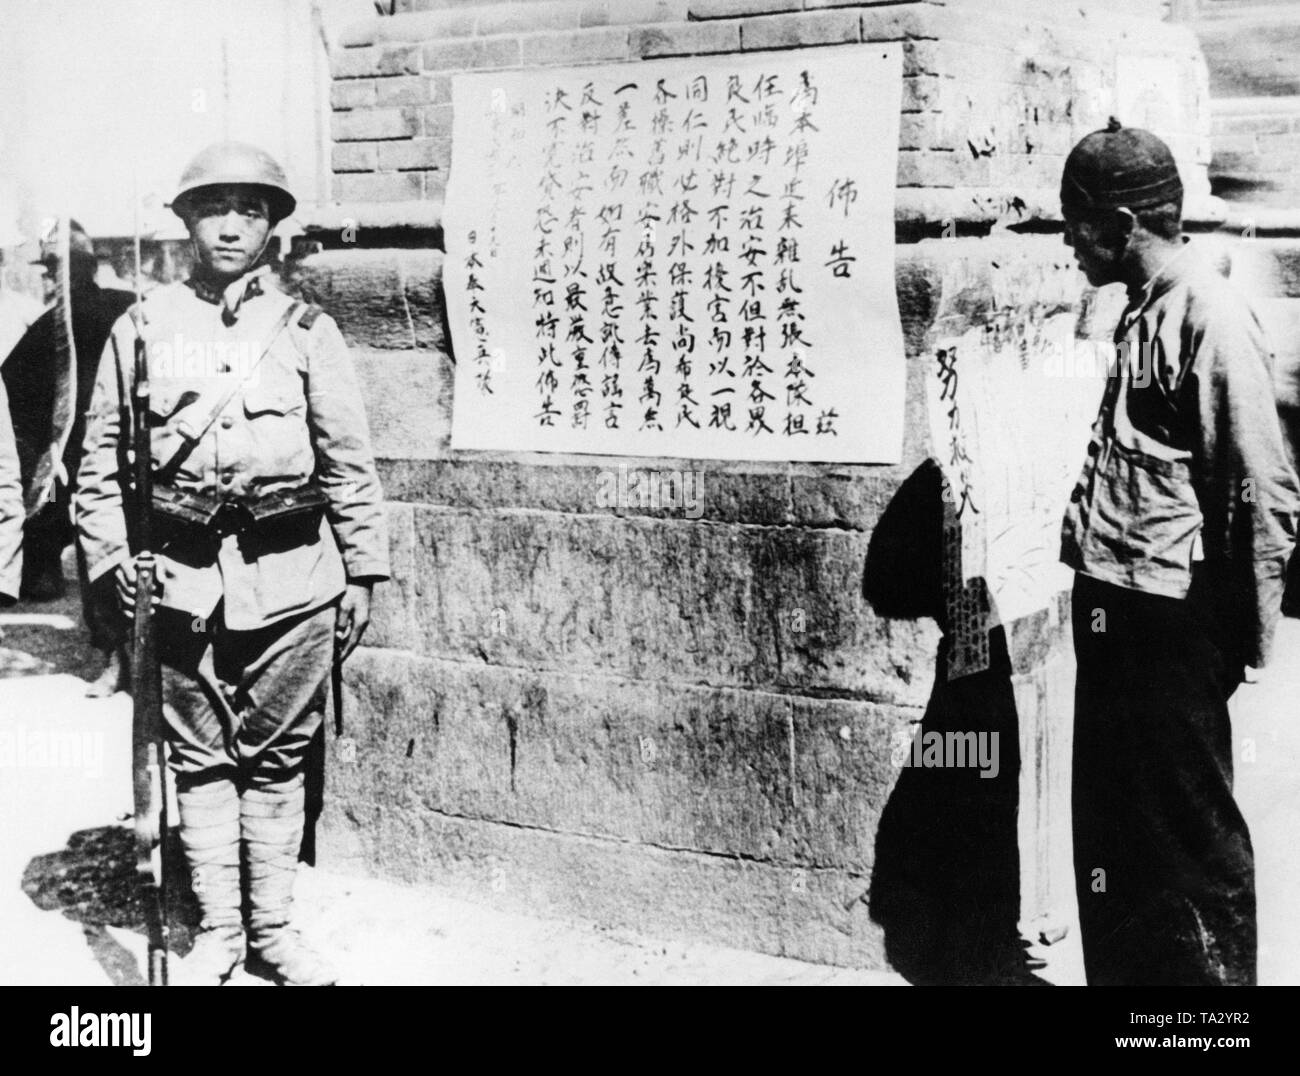 Was there any white or black person serving in the Japanese Army